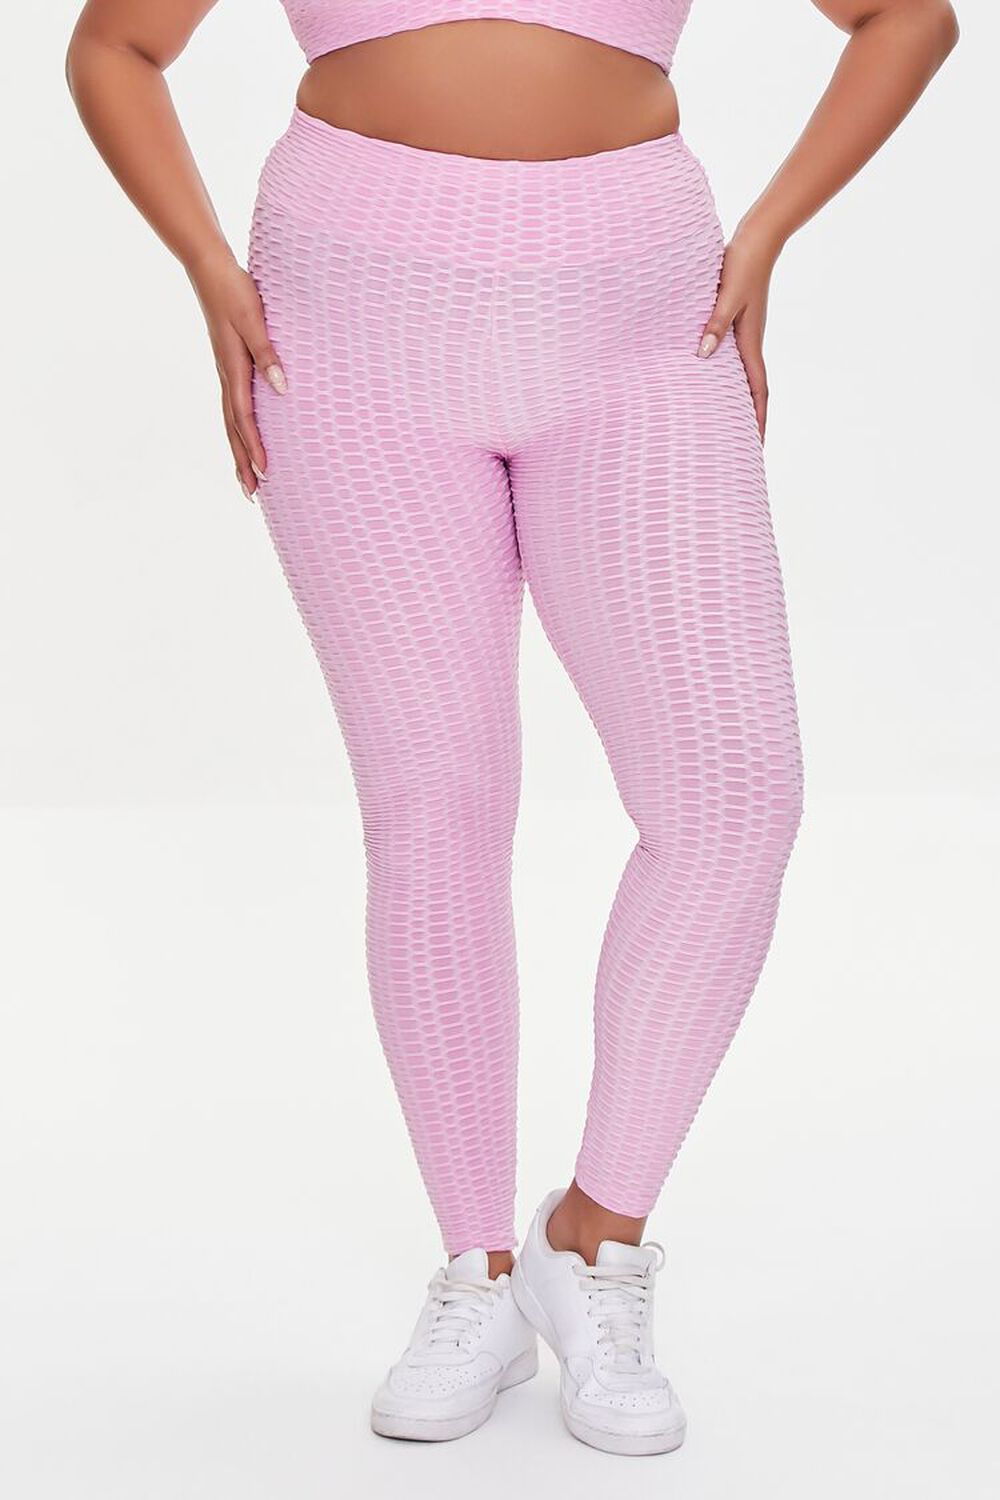 PINK Plus Size Active Ruched-Bum Leggings, image 2